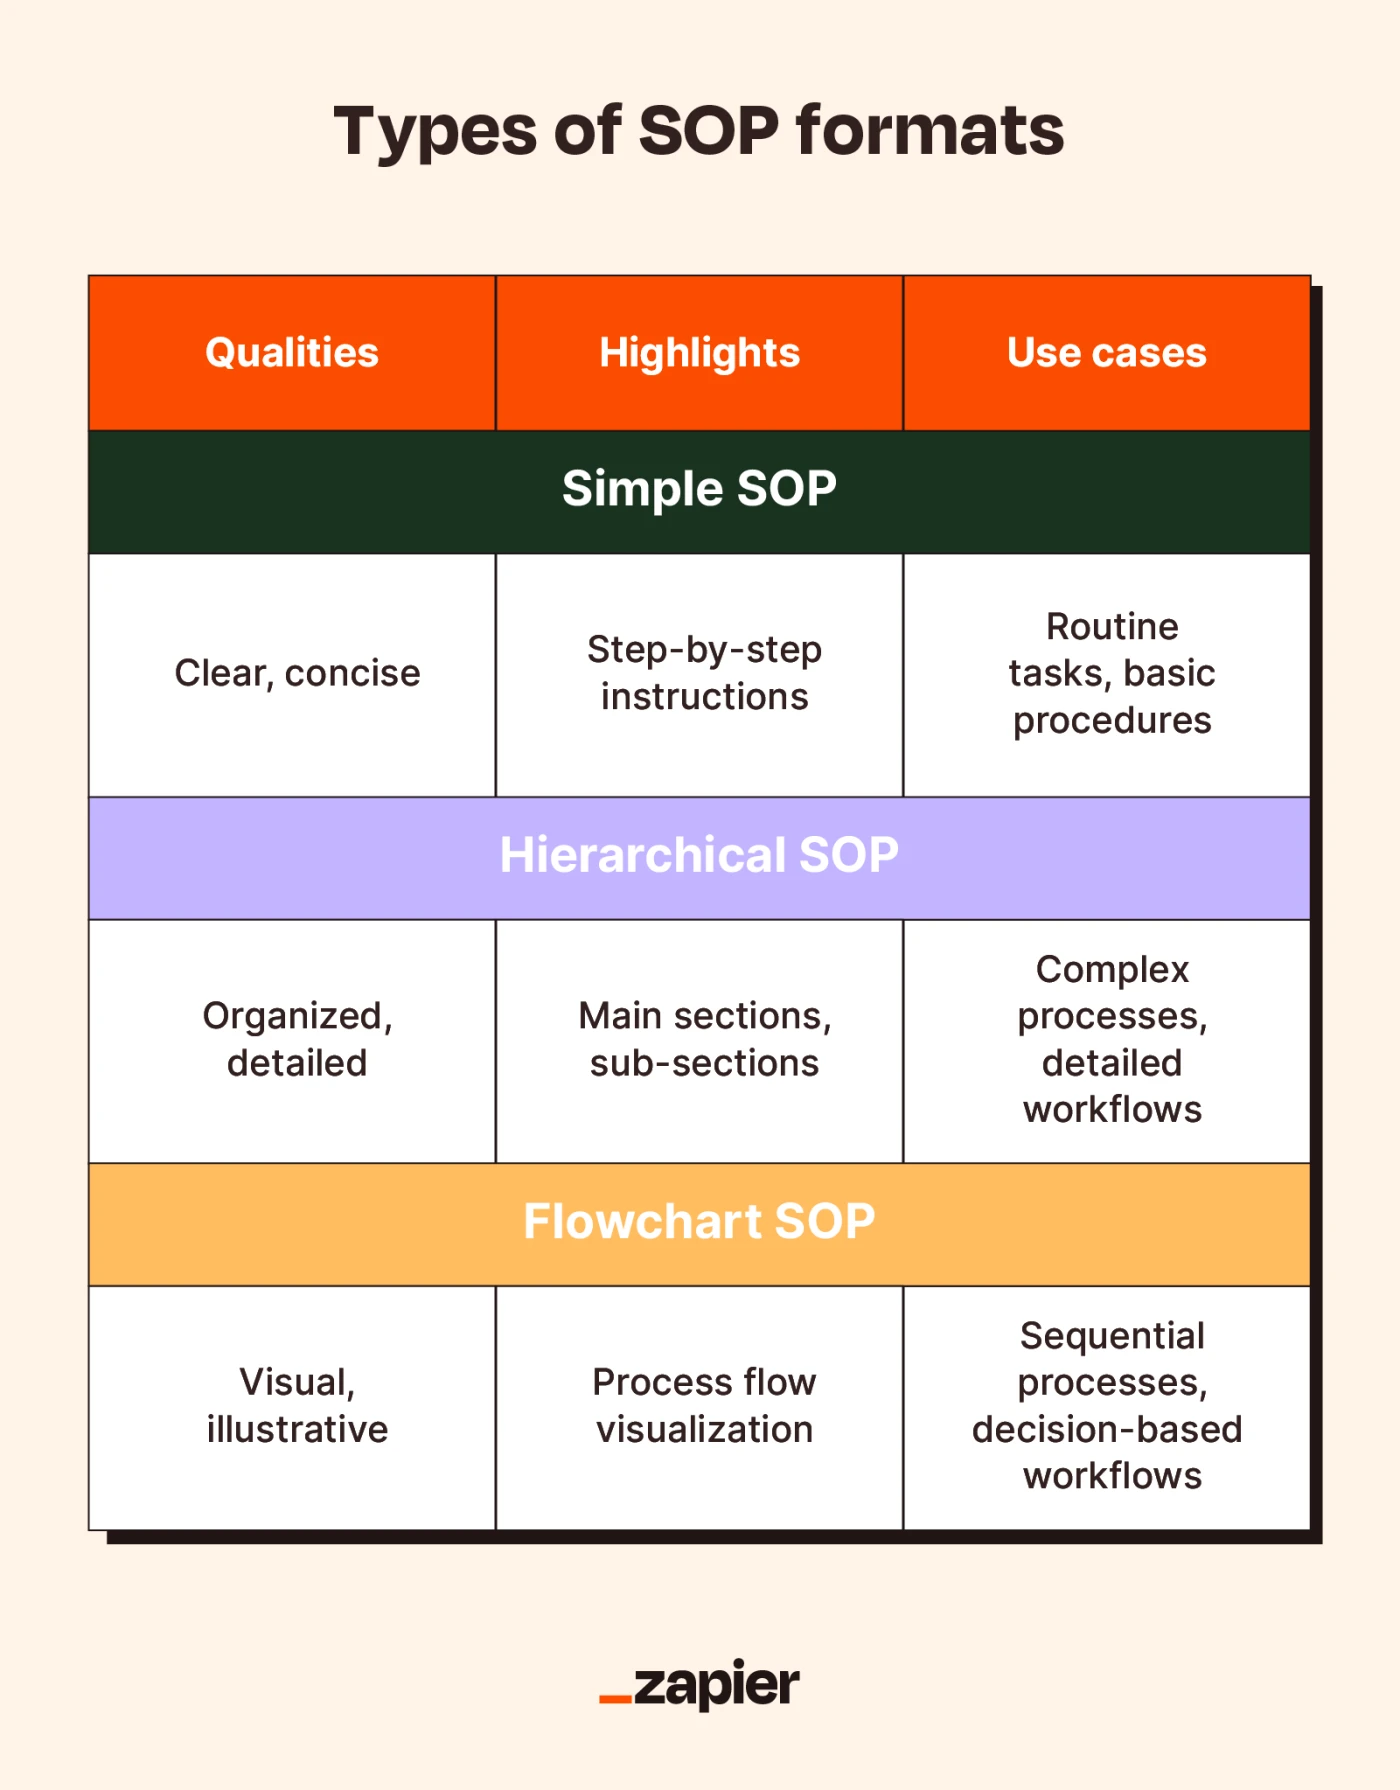 Illustration of a chart showing the types of SOP formats